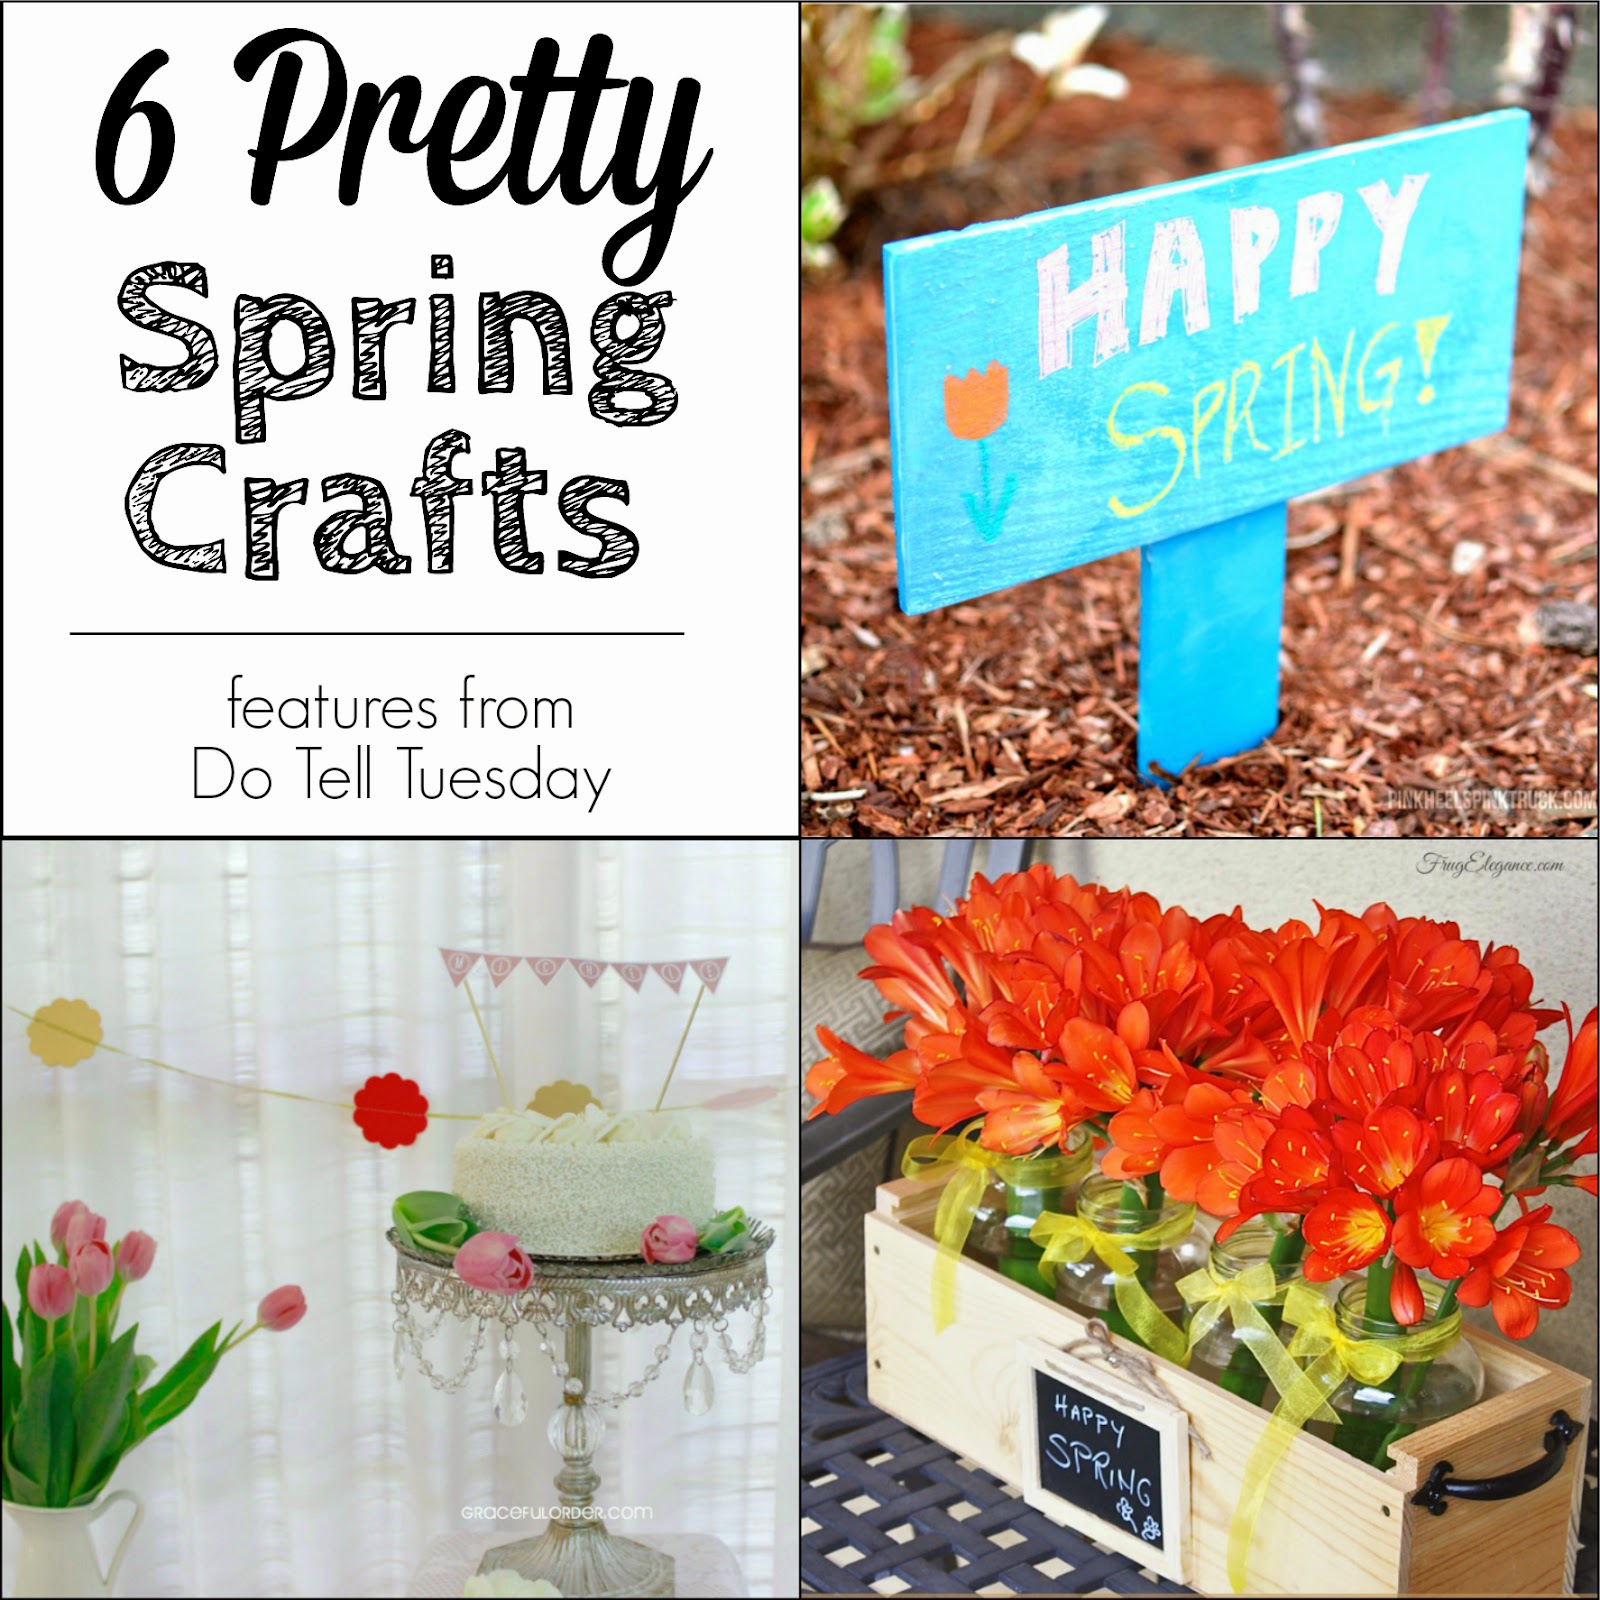 Pretty Spring Crafts & Do Tell Tuesday on Diane's Vintage Zest!